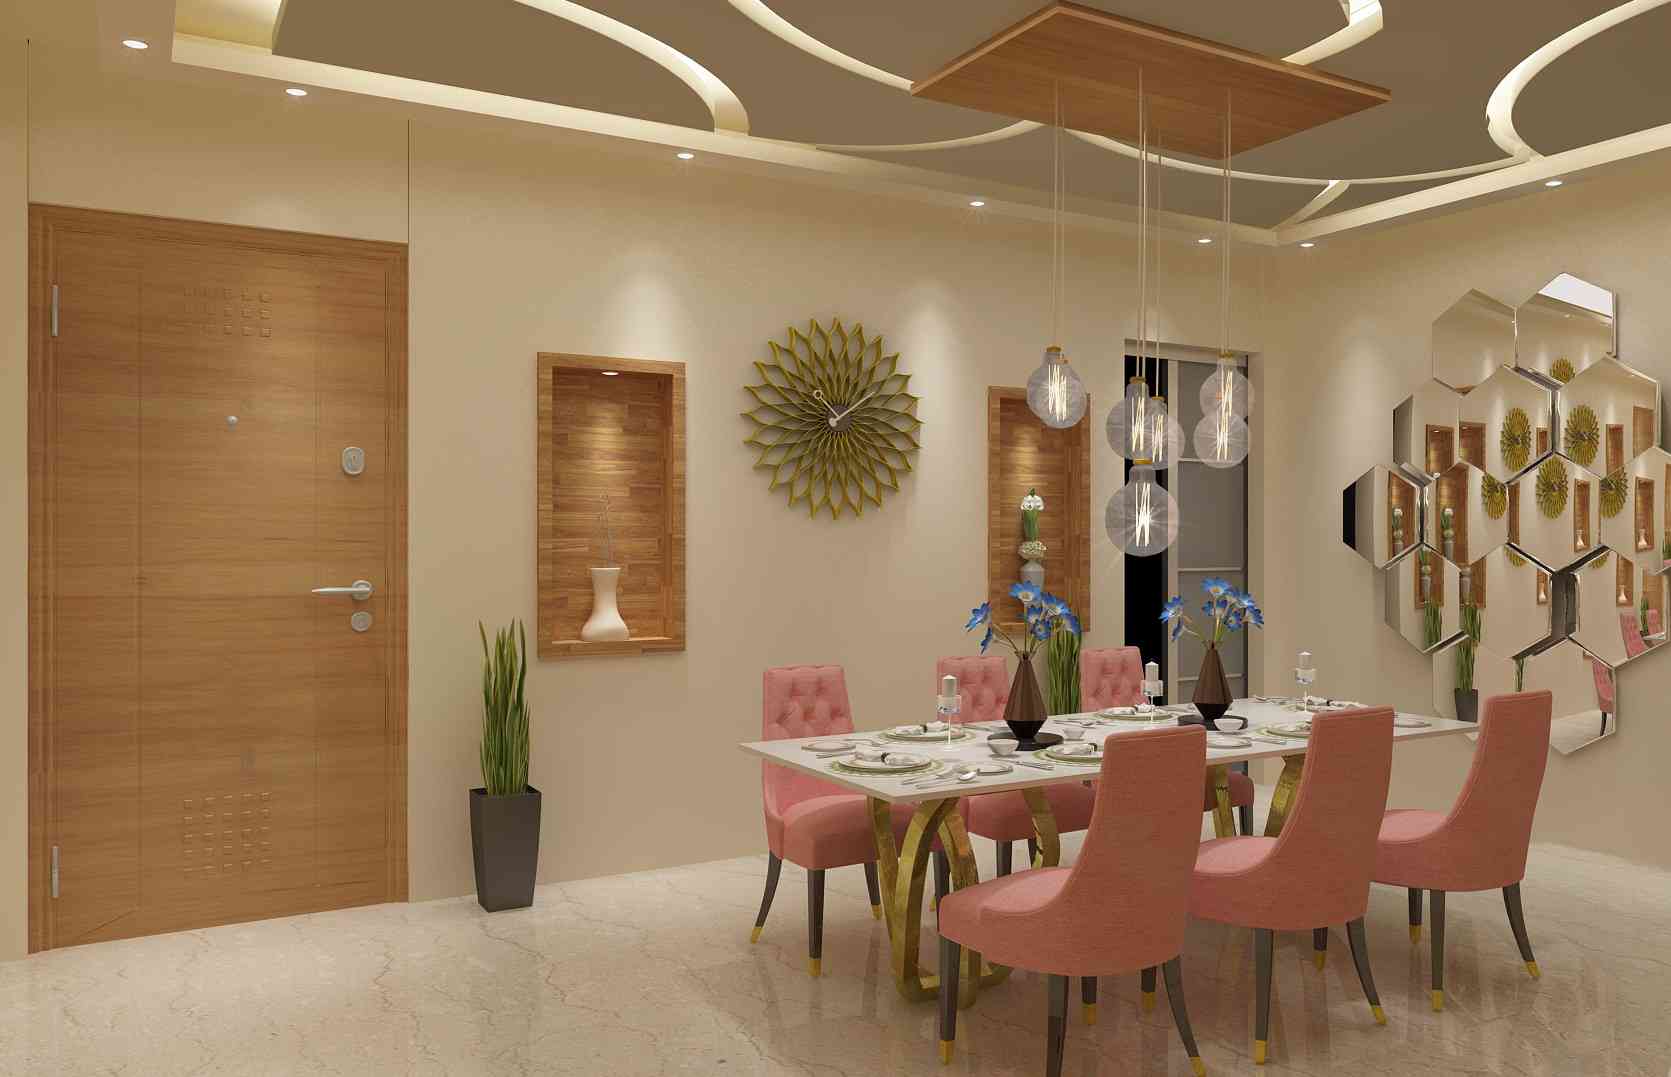 Luxury Dinning Room Designs With Hanging Lights And Wall Decor